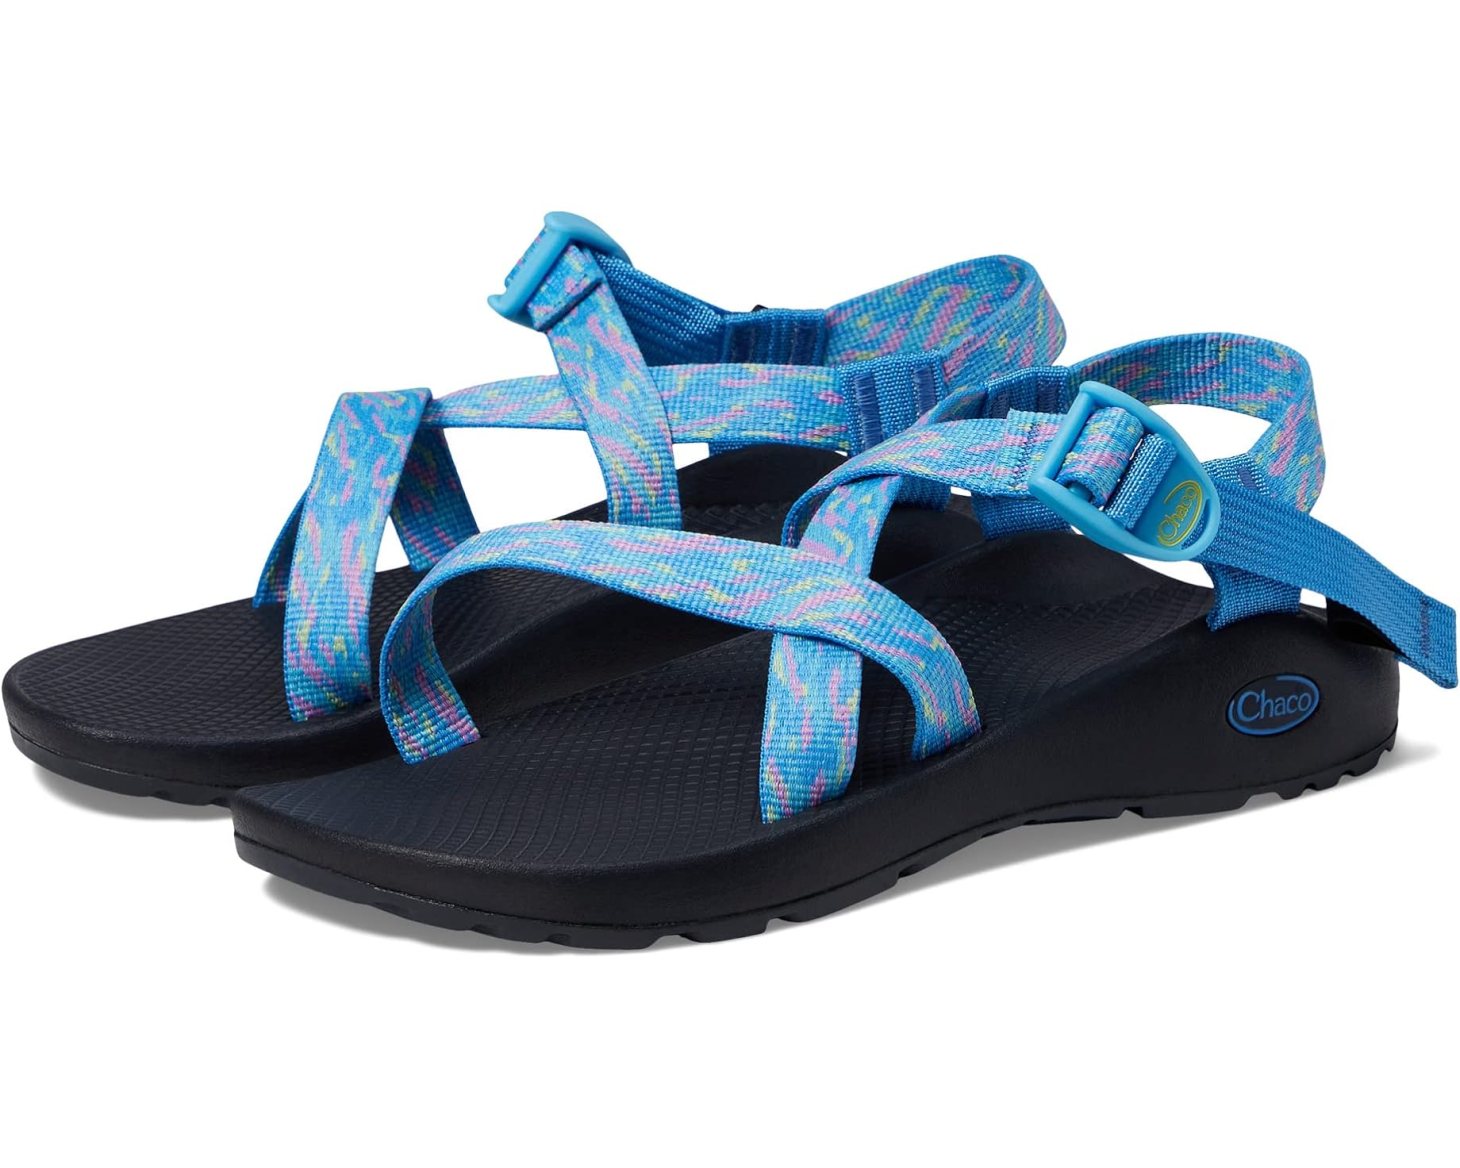 chaco z1 classic, one of the best travel sandals